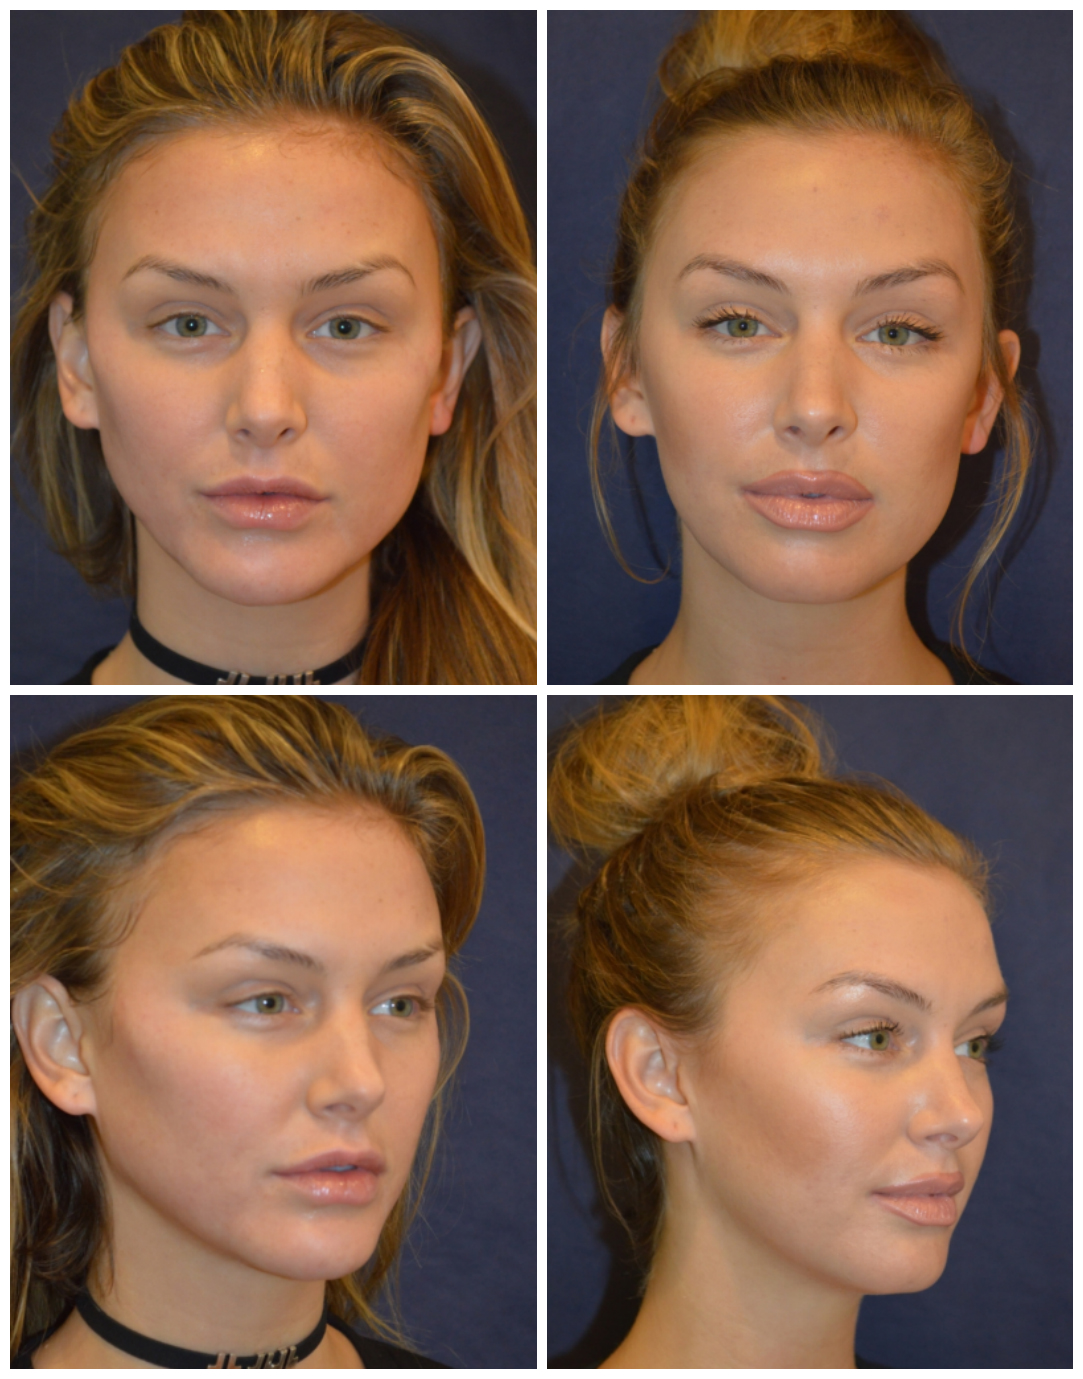 Lala Kent, before and after her treatments with Dr. Diamond.